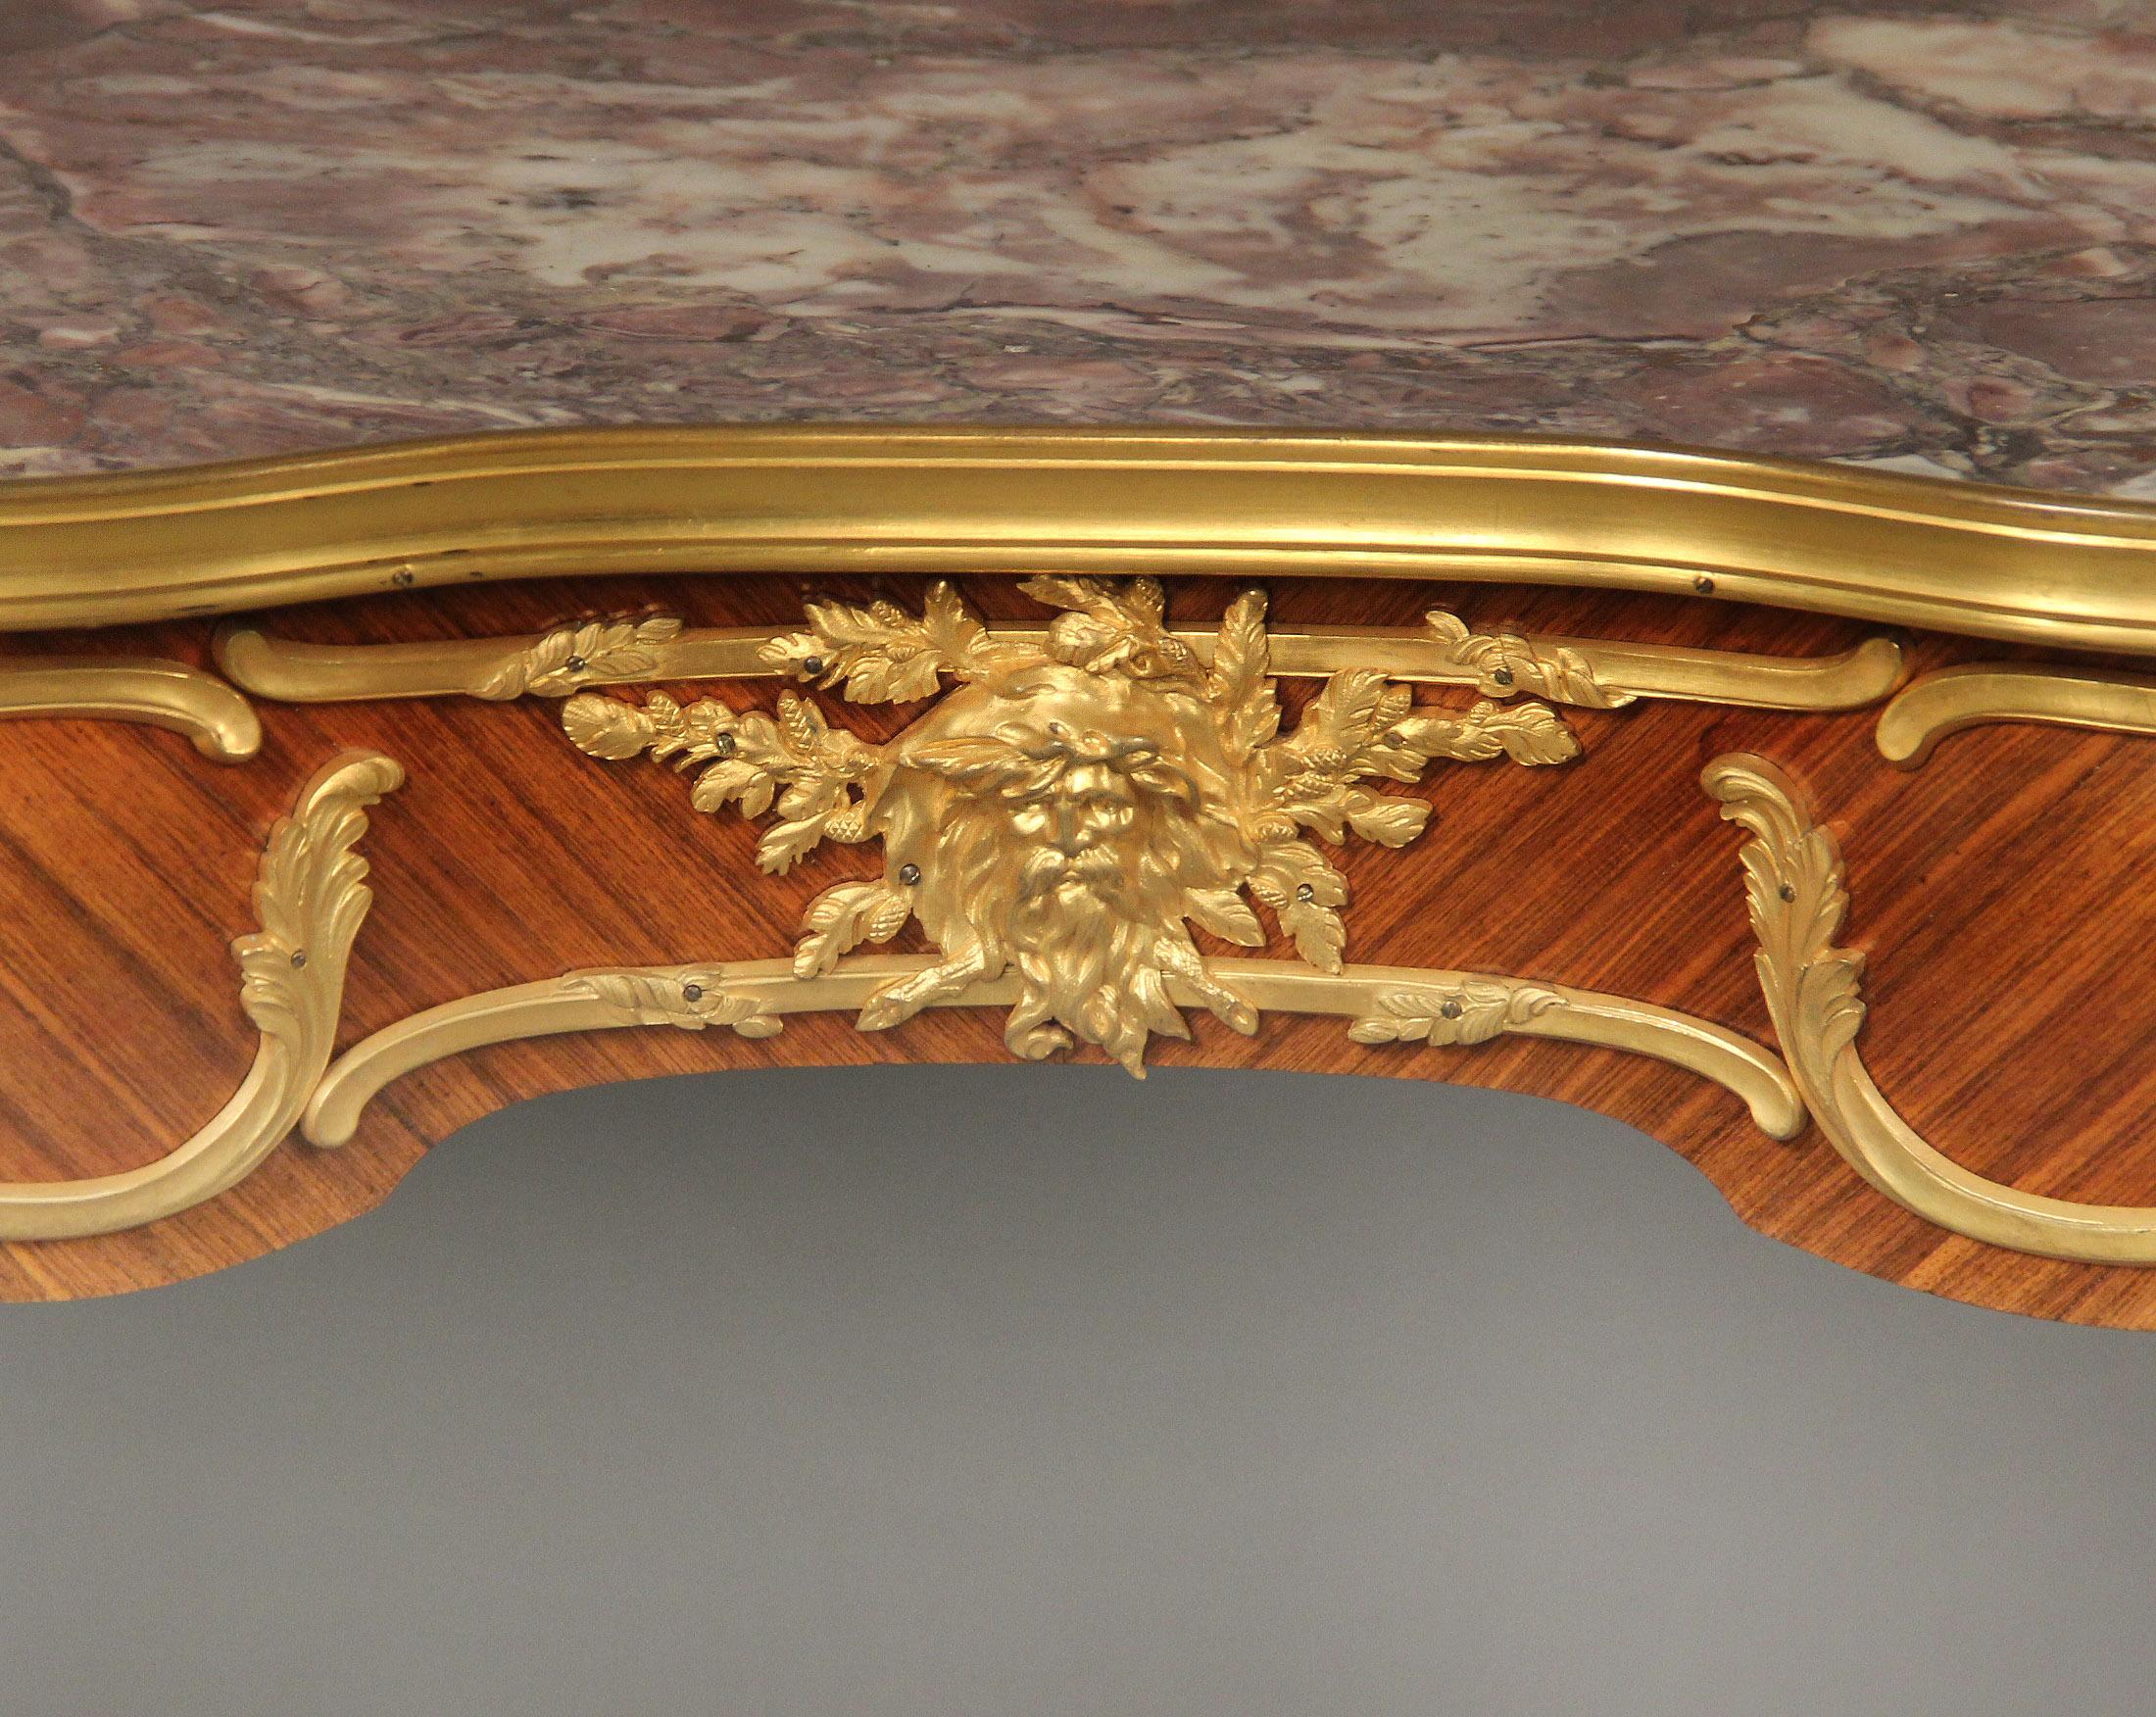 Fine early 20th century gilt bronze mounted Louis XV style side/writing table by François Linke

François Linke – Index Number 49

The shaped rectangular fleur de pecher marble top, above a serpentine frieze with foliate-cast frame, the front